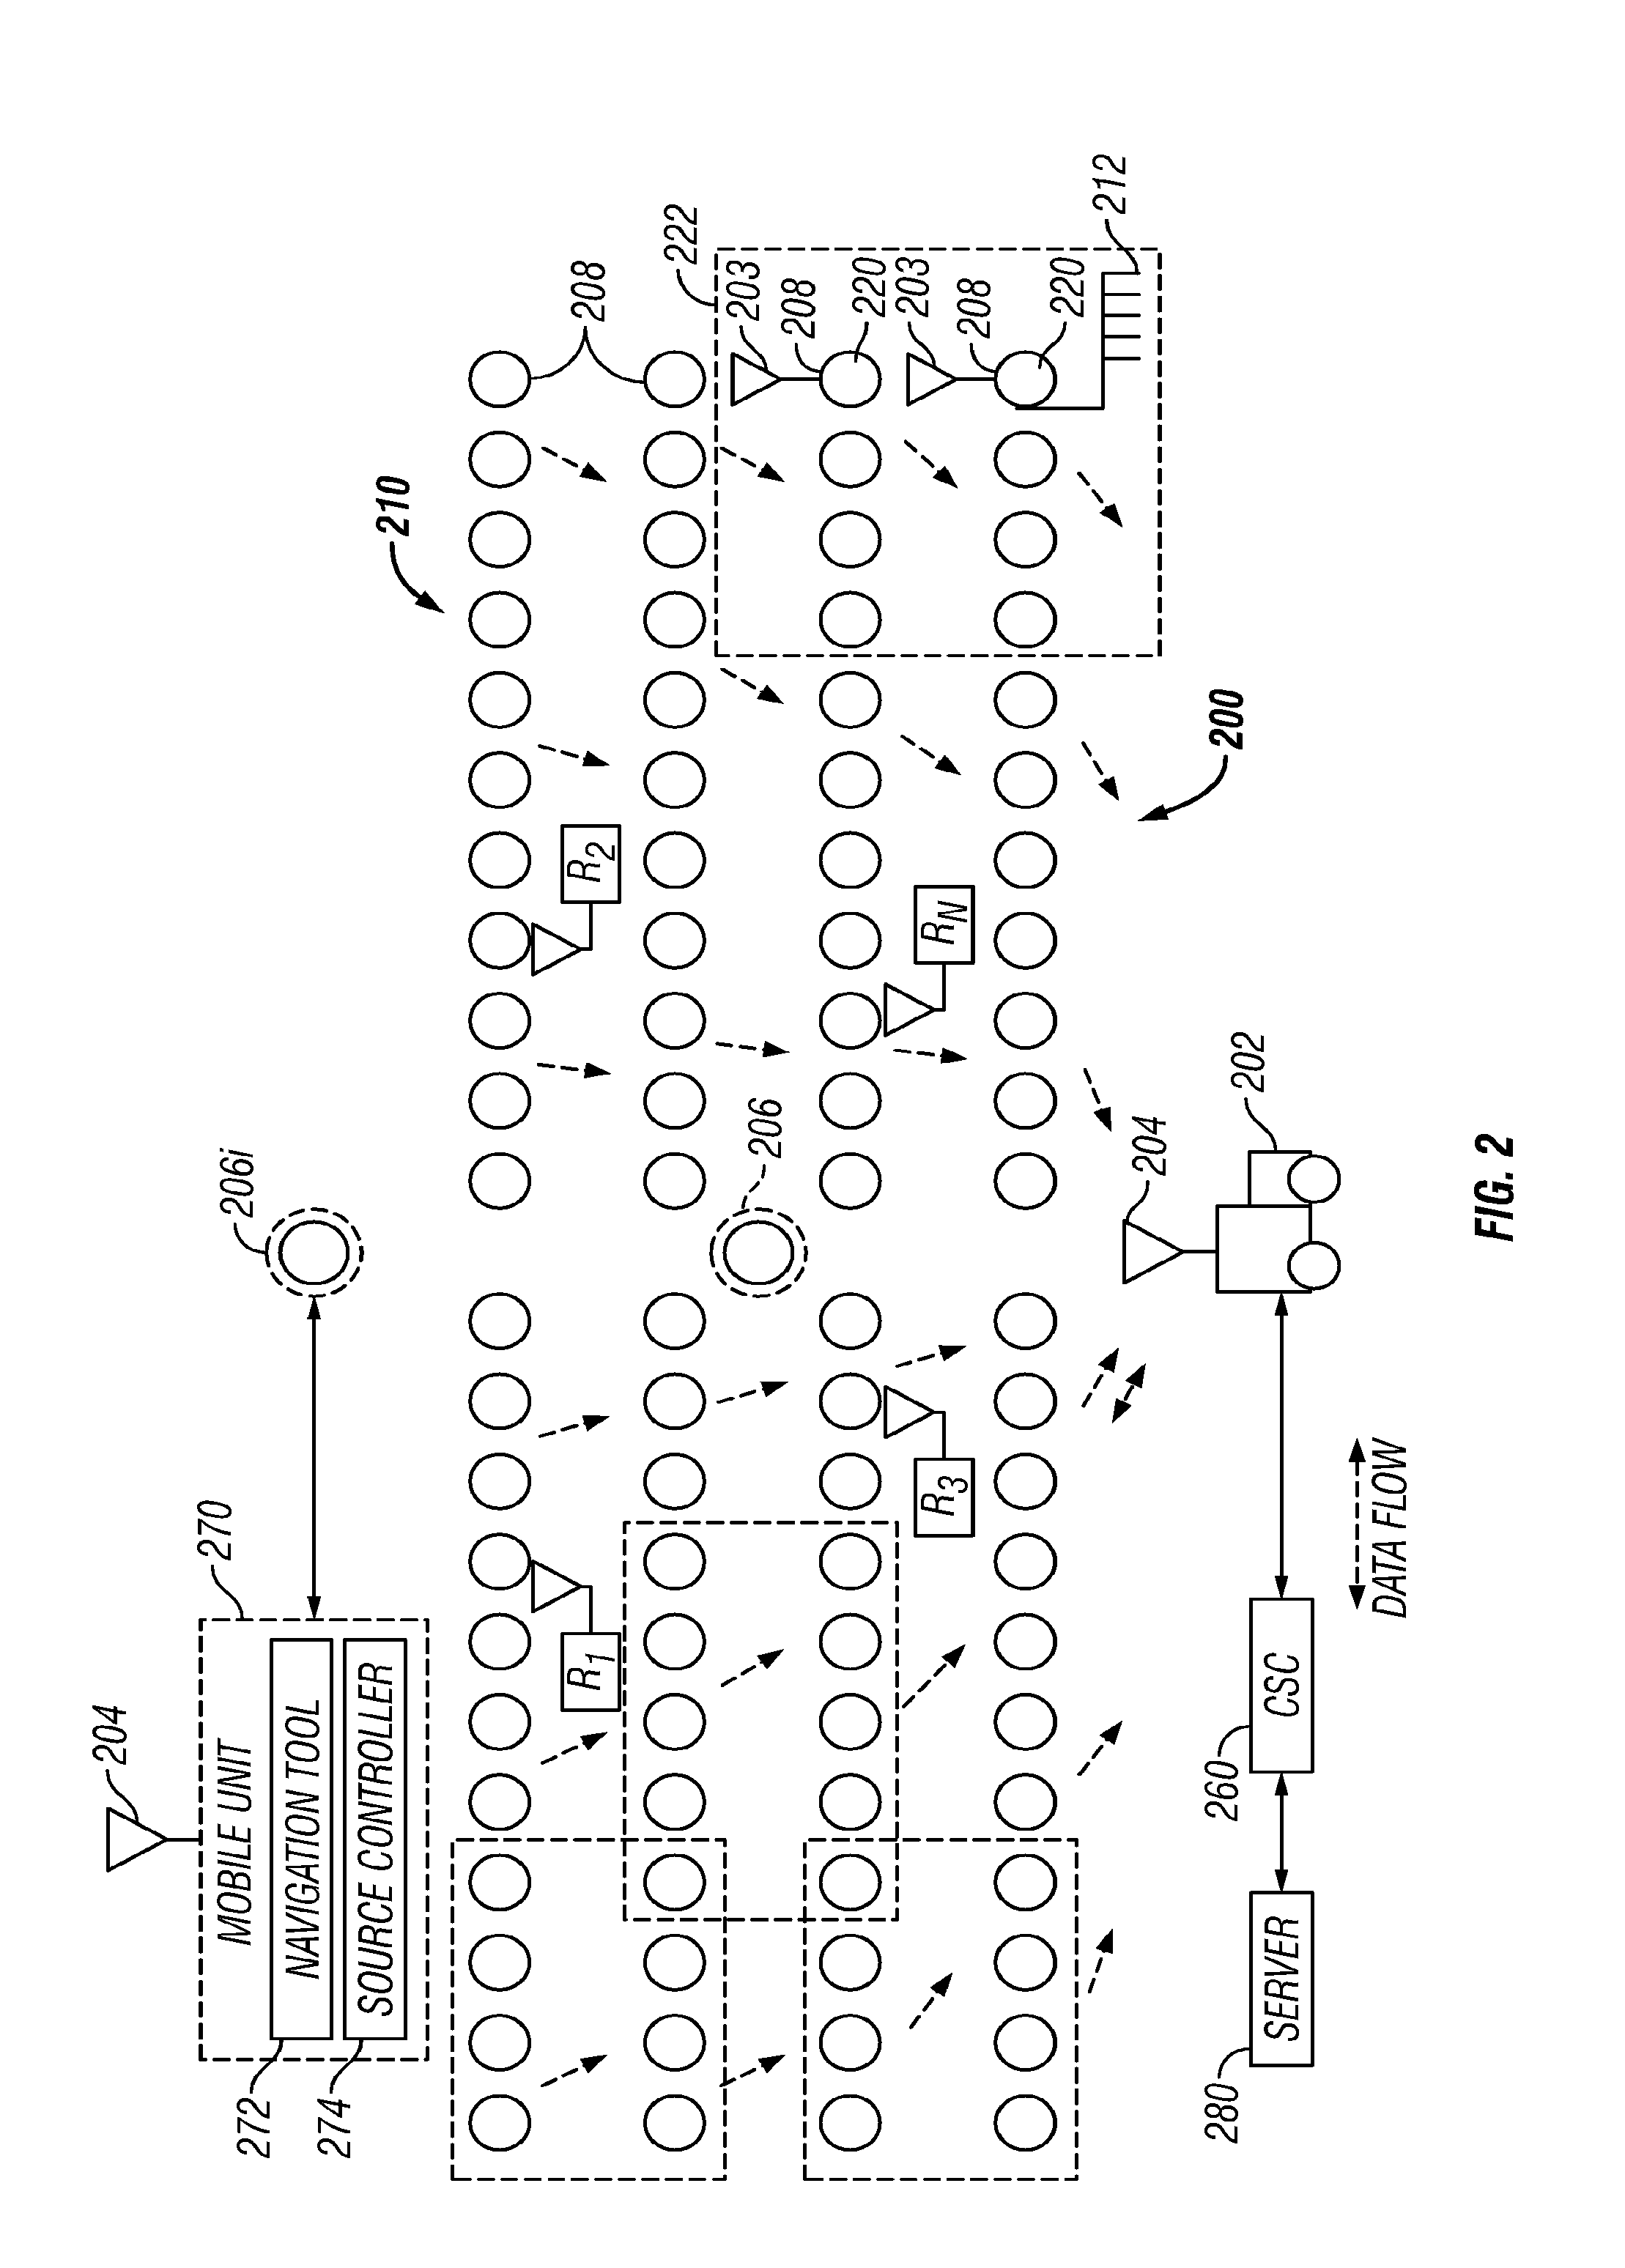 Seismic data acquisition systems and method utilizing a wireline repeater unit